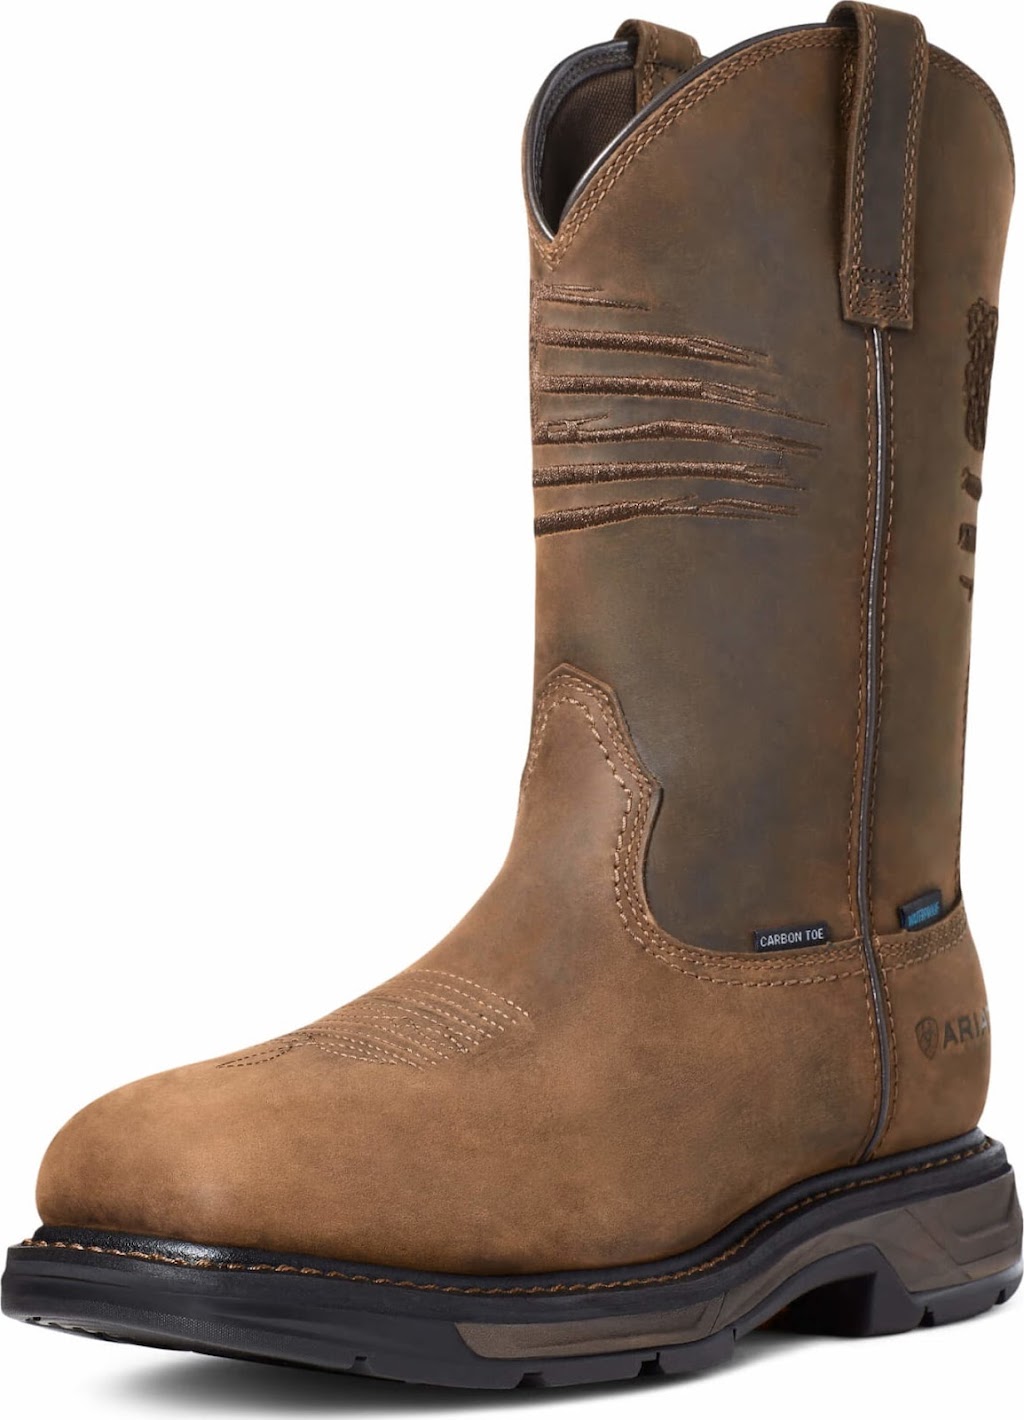 Guardian Boot Co. | 8642 W Market St Suite 140, Greensboro, NC 27409, USA | Phone: (855) 692-3242